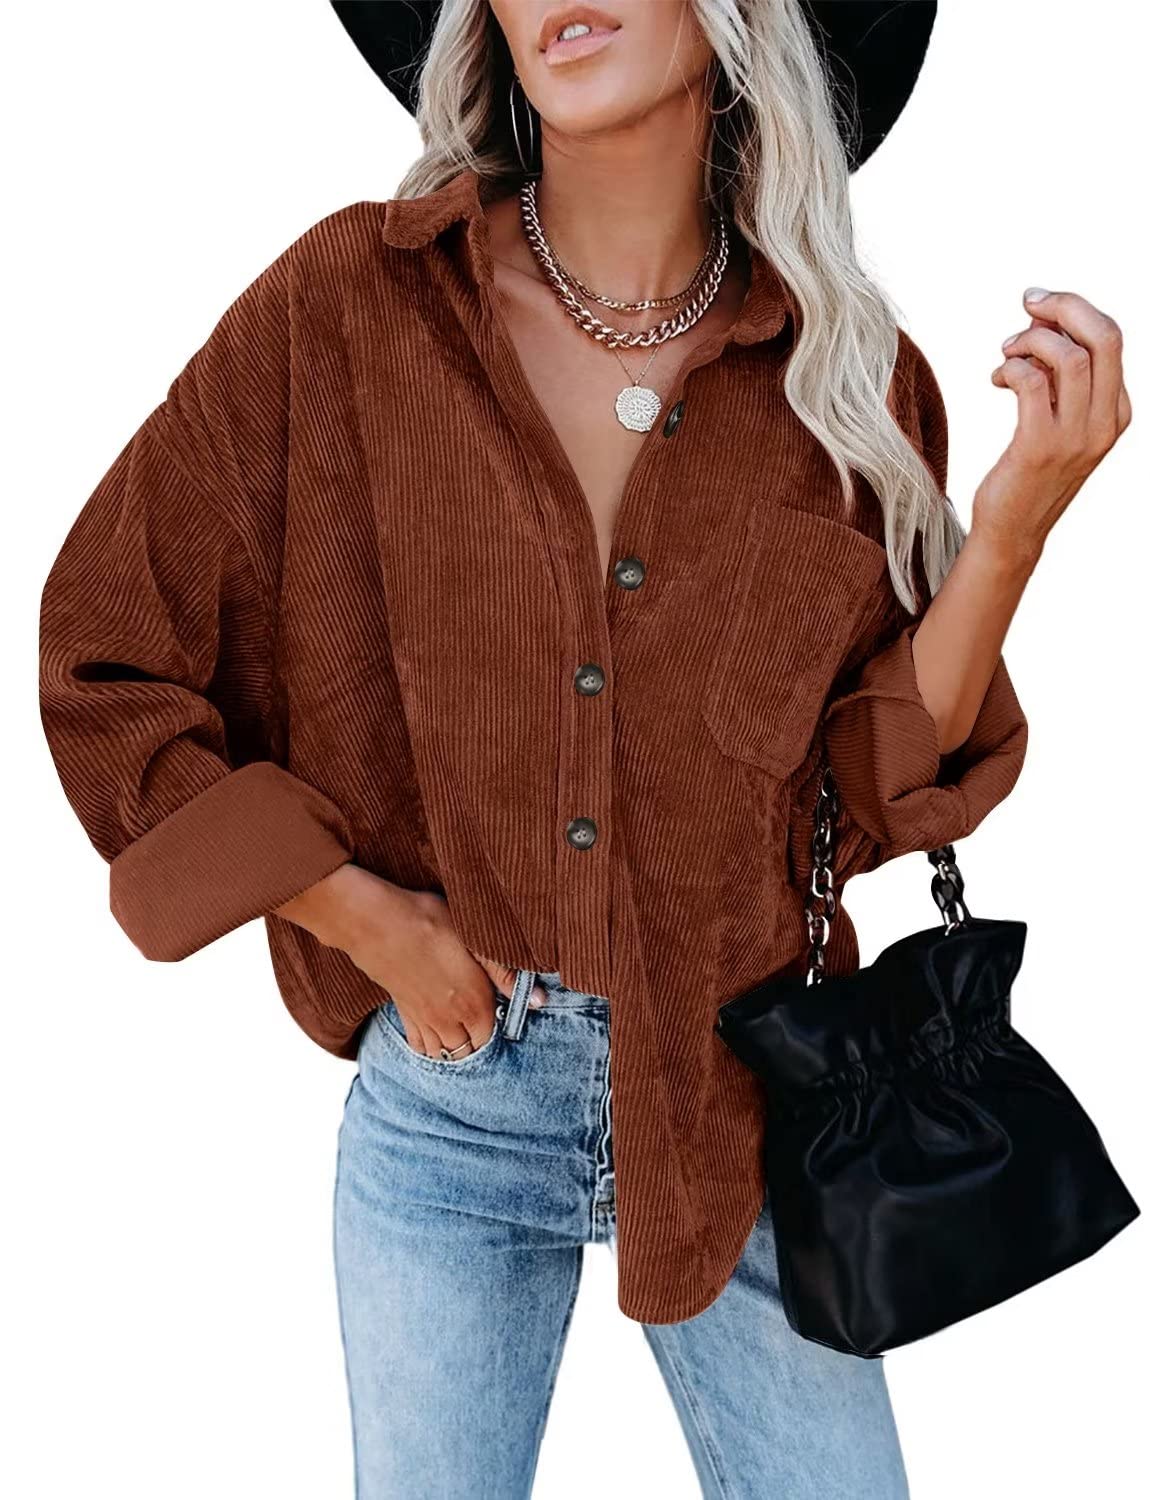 ZOLUCKY Women's Casual Plus Size Shacket Jacket Long Sleeve Button Down Shirts Blouses Tops